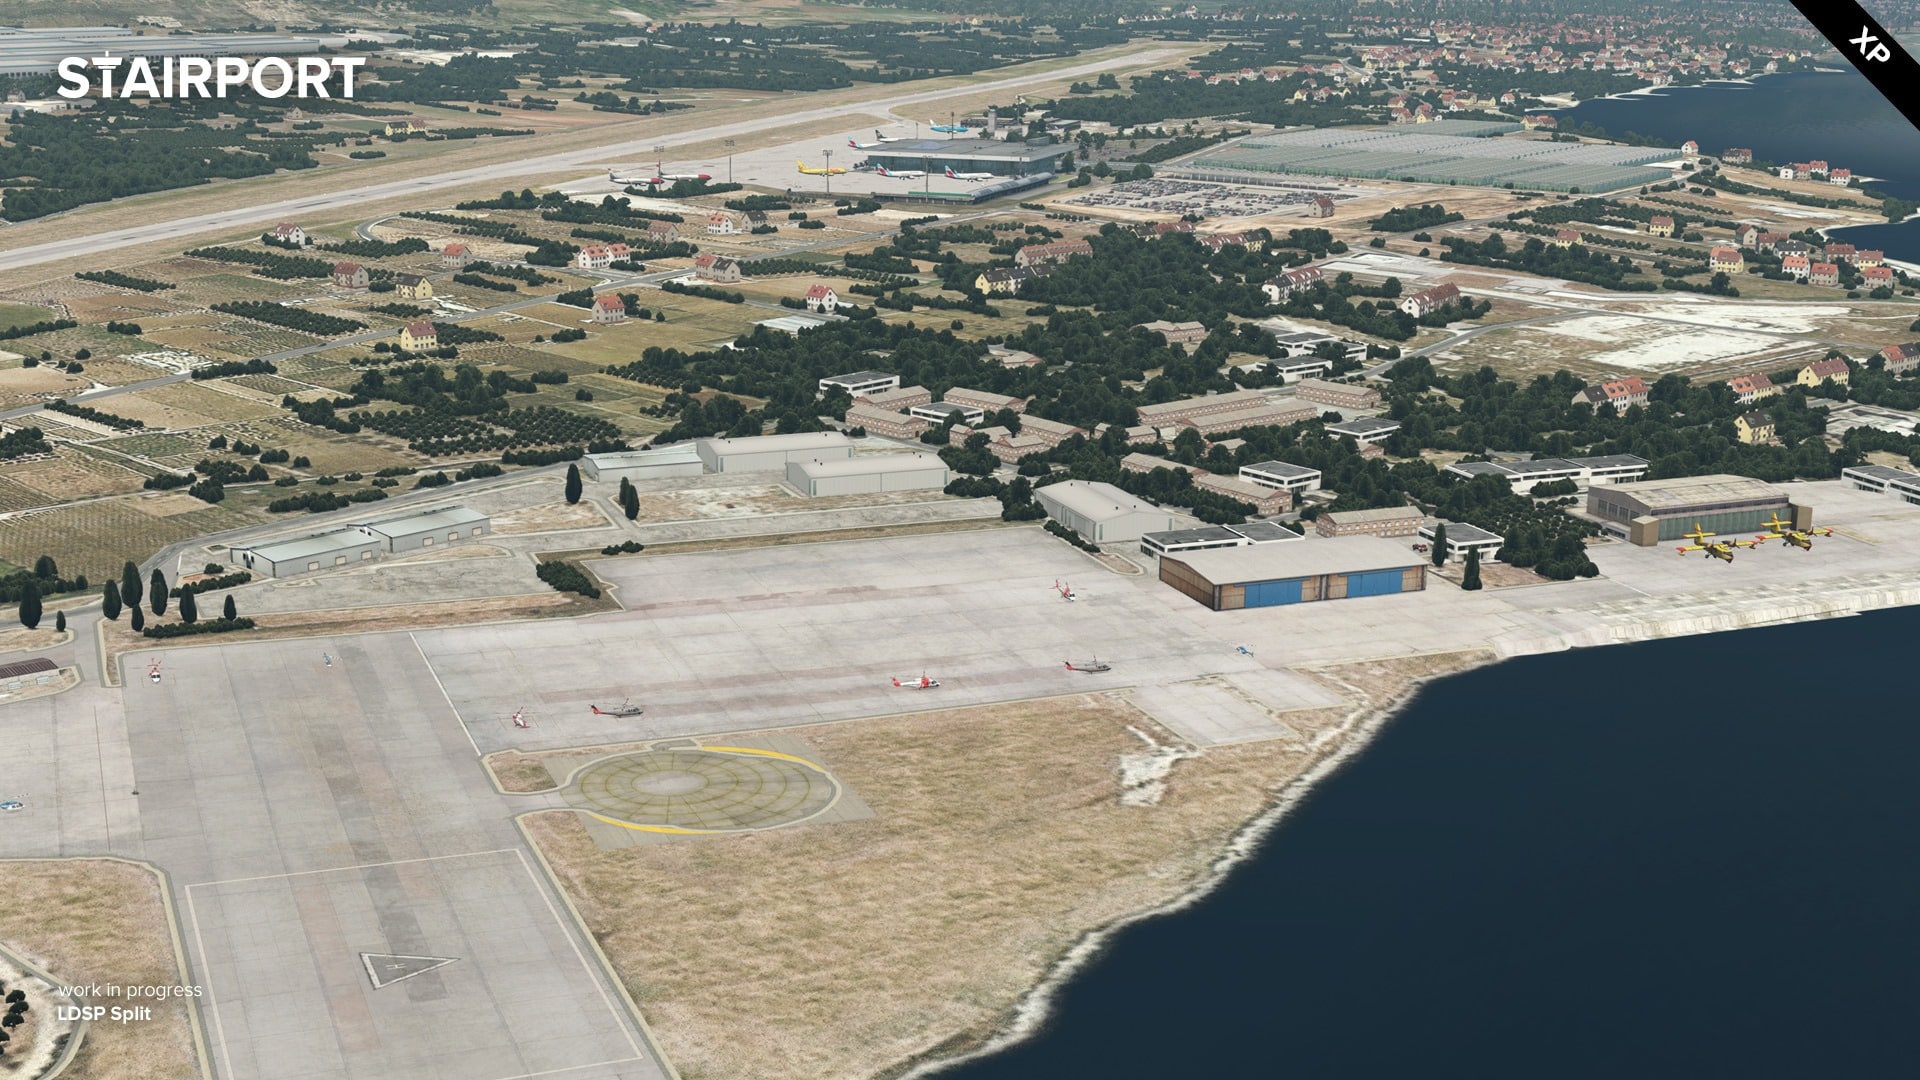 Stairport Sceneries Releases Split Airport for X-Plane 11 - Aerosoft, Stairport Sceneries, X-Plane